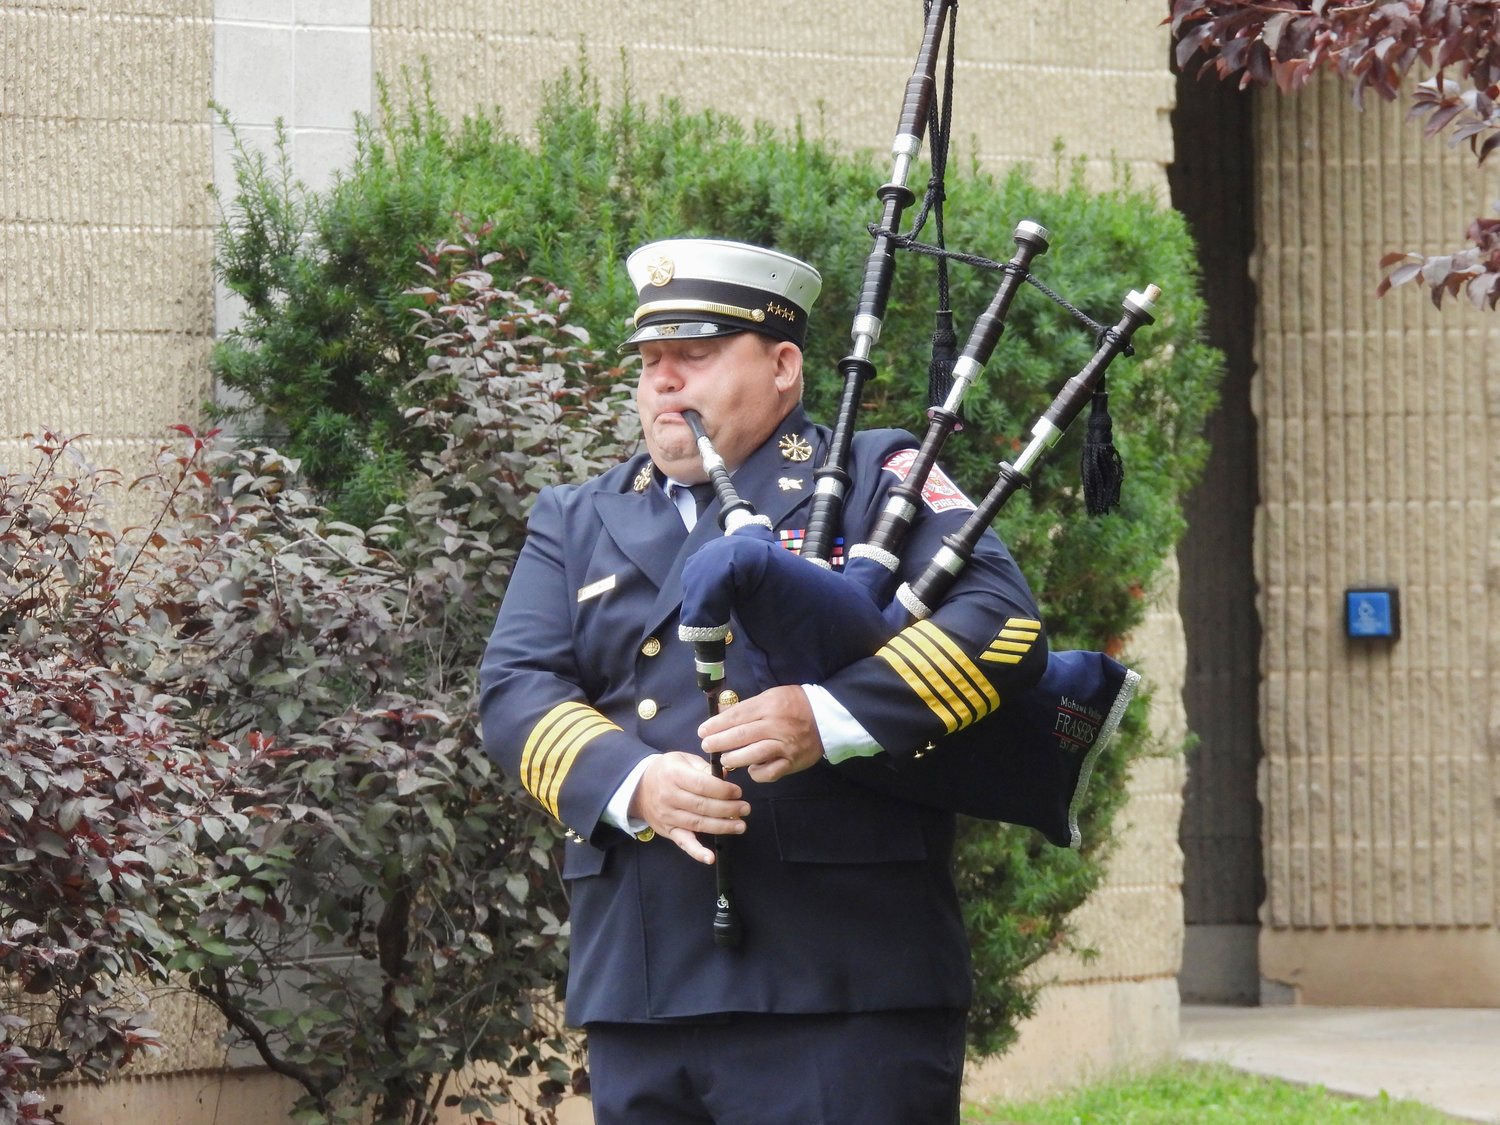 Oneida Fire Department Assistant Chief Rob Cowles plays "Amazing Grace" at the city of Oneida's 9/11 Remembrance Ceremony on Sunday.